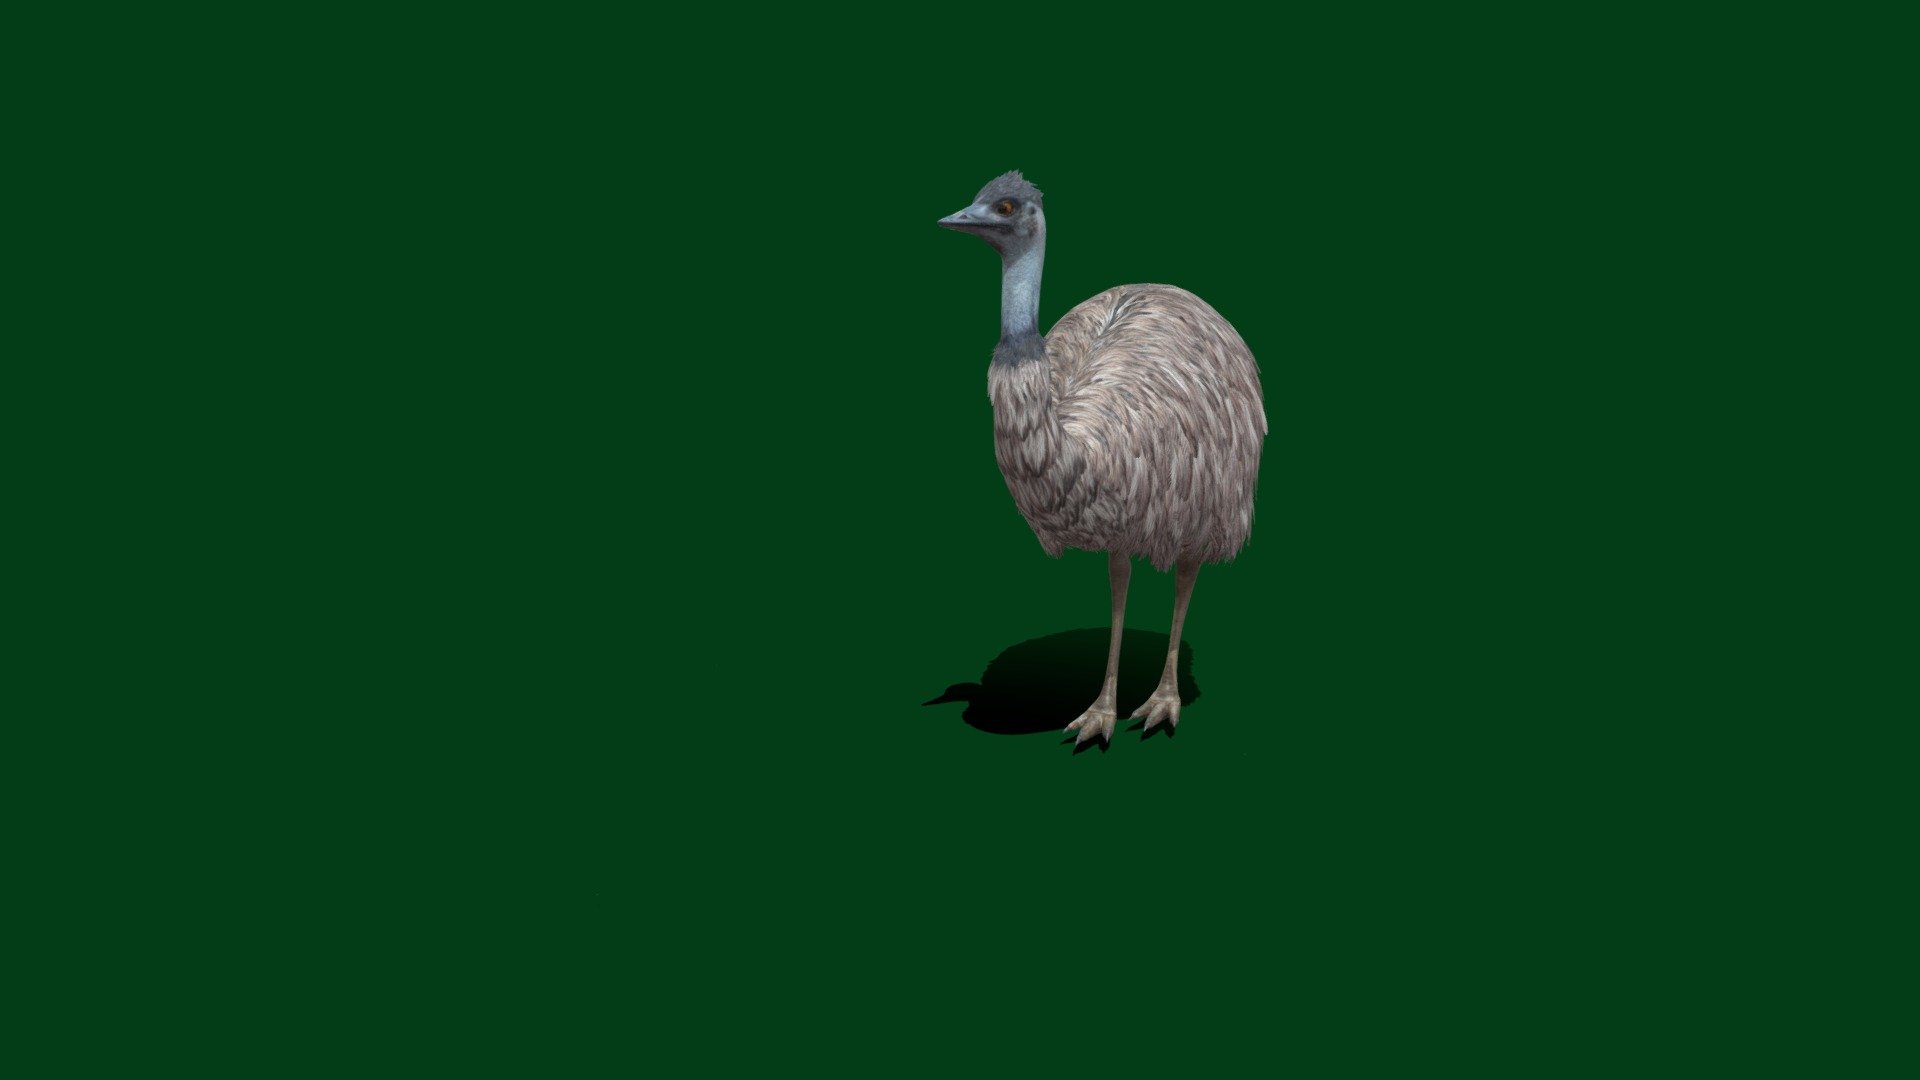 Fixed

animation errors and version errors 
The emu is the second-largest living bird by height, after its ratite relative, the ostrich. It is endemic to Australia where it is the largest native bird and the only extant member of the genus Dromaius 3d model